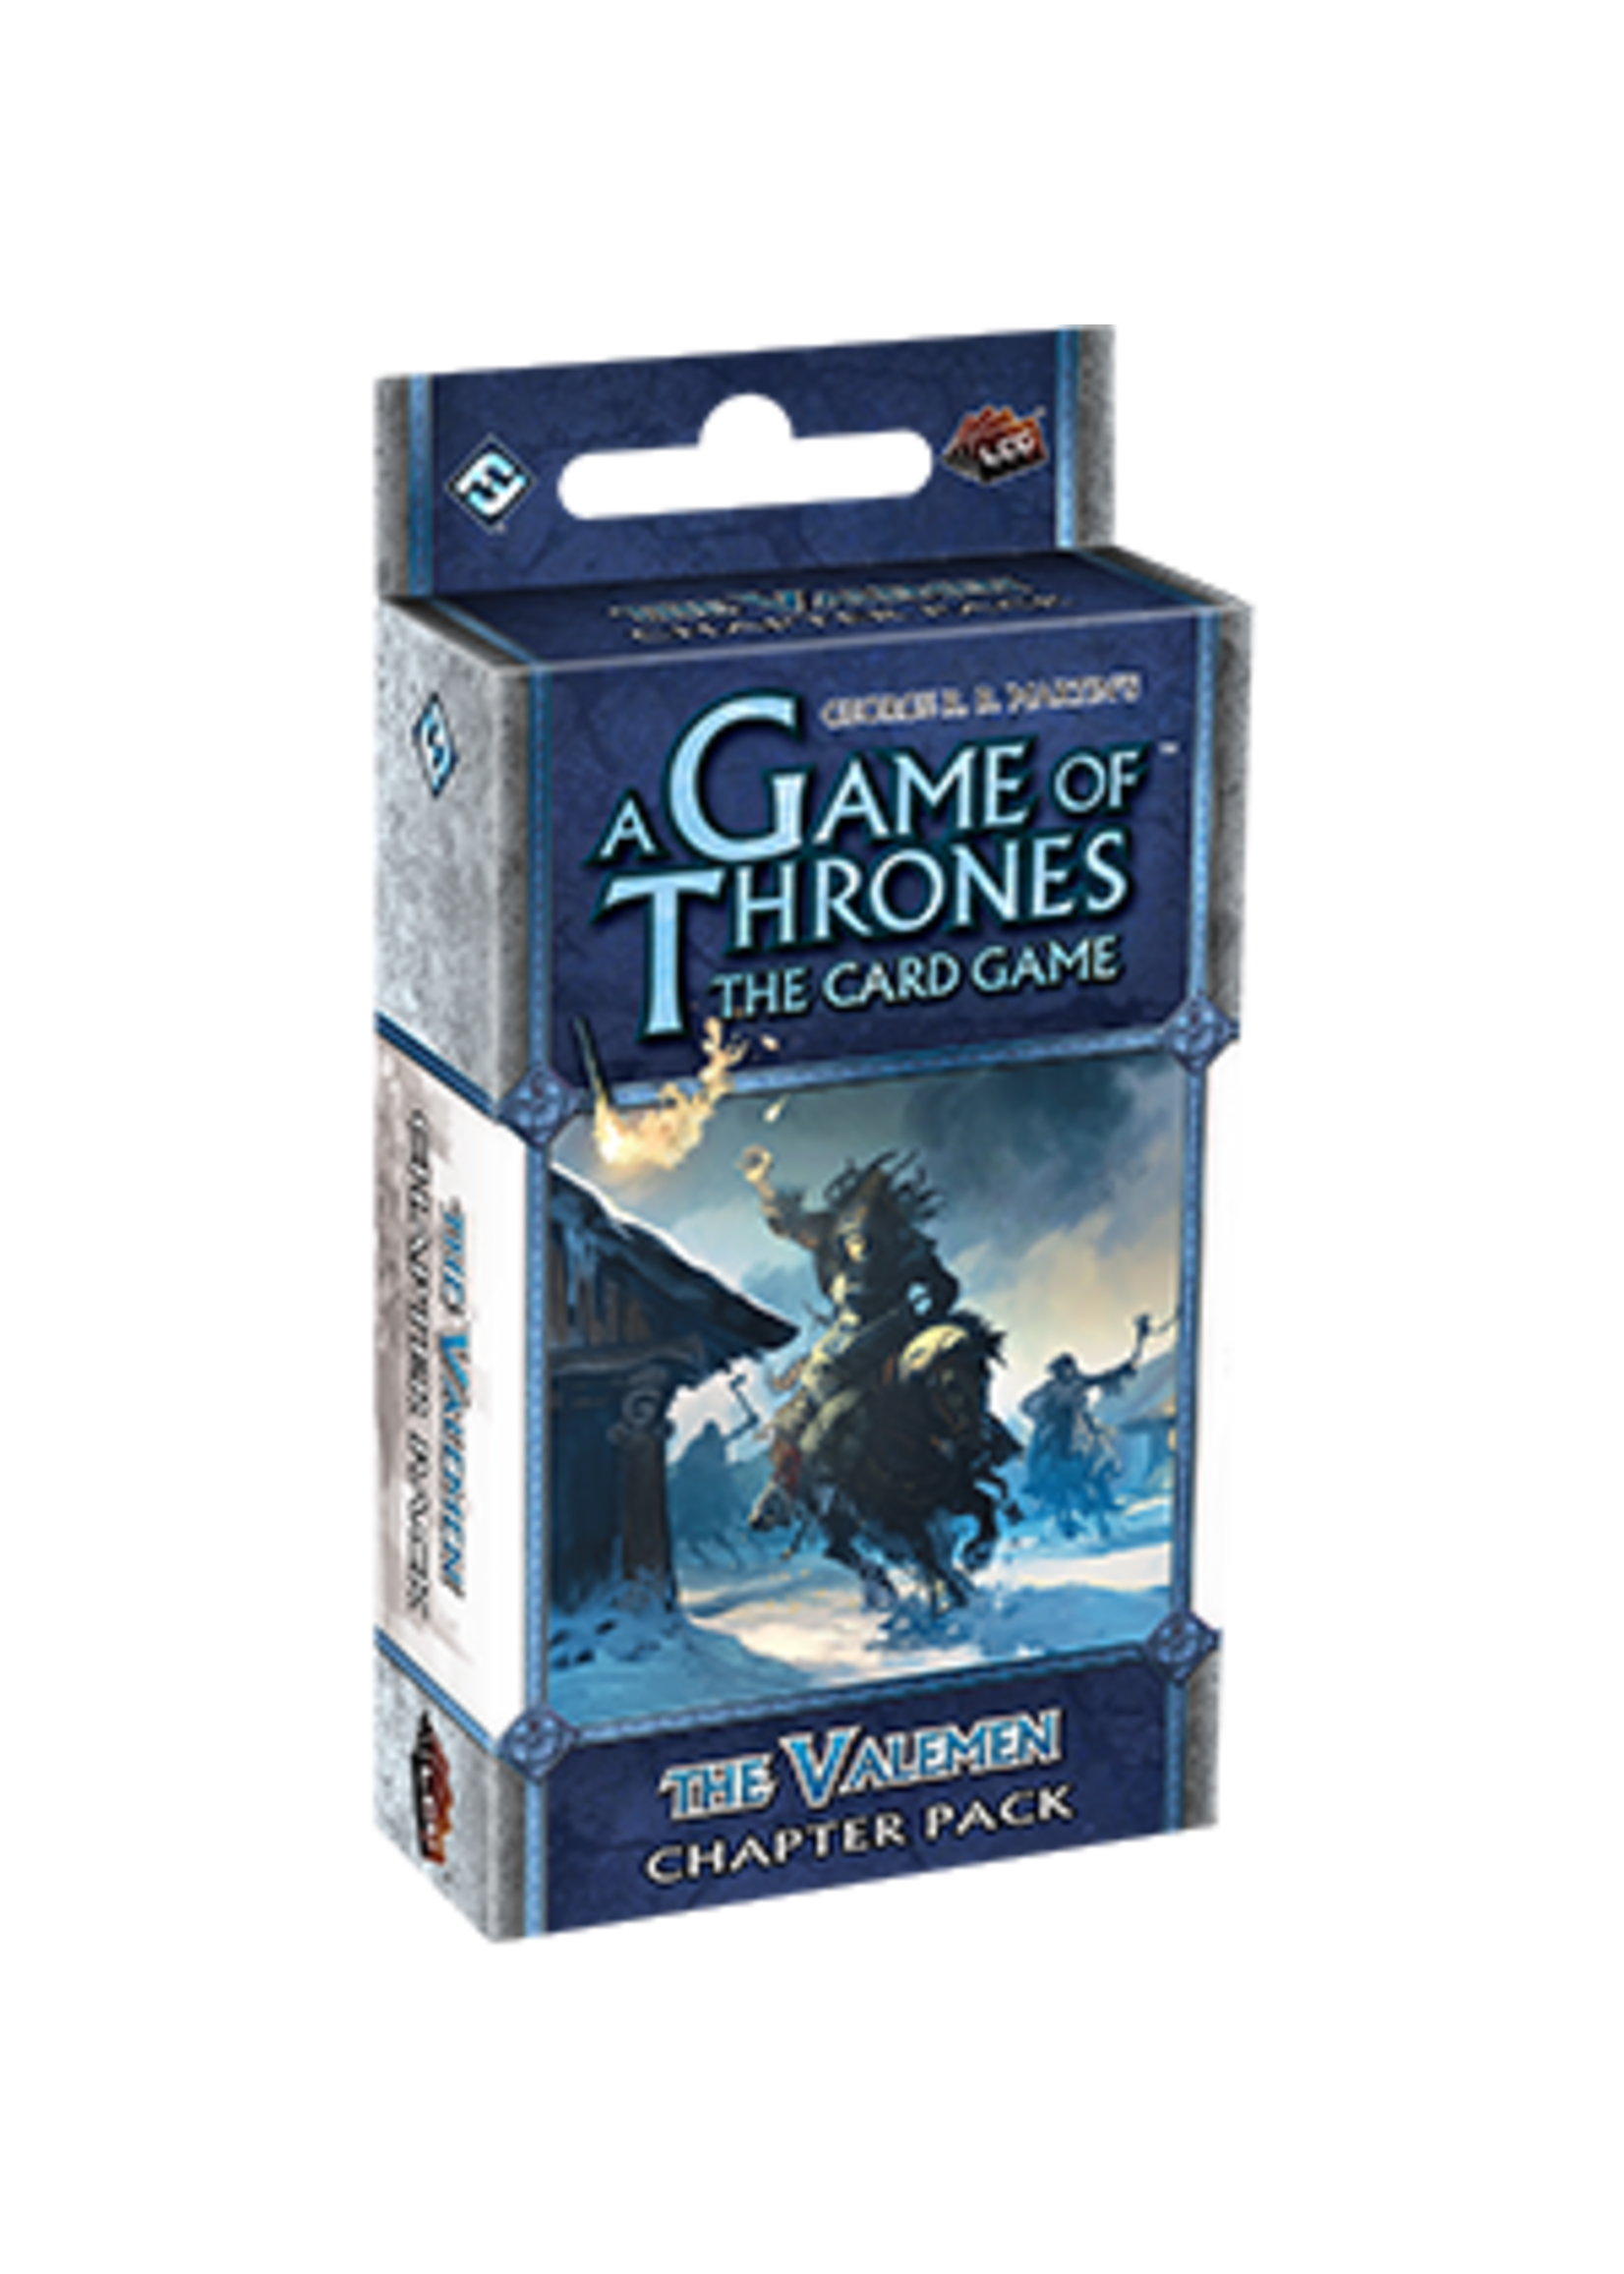 A Game of Thrones LCG: The Valemen Chapter Pack